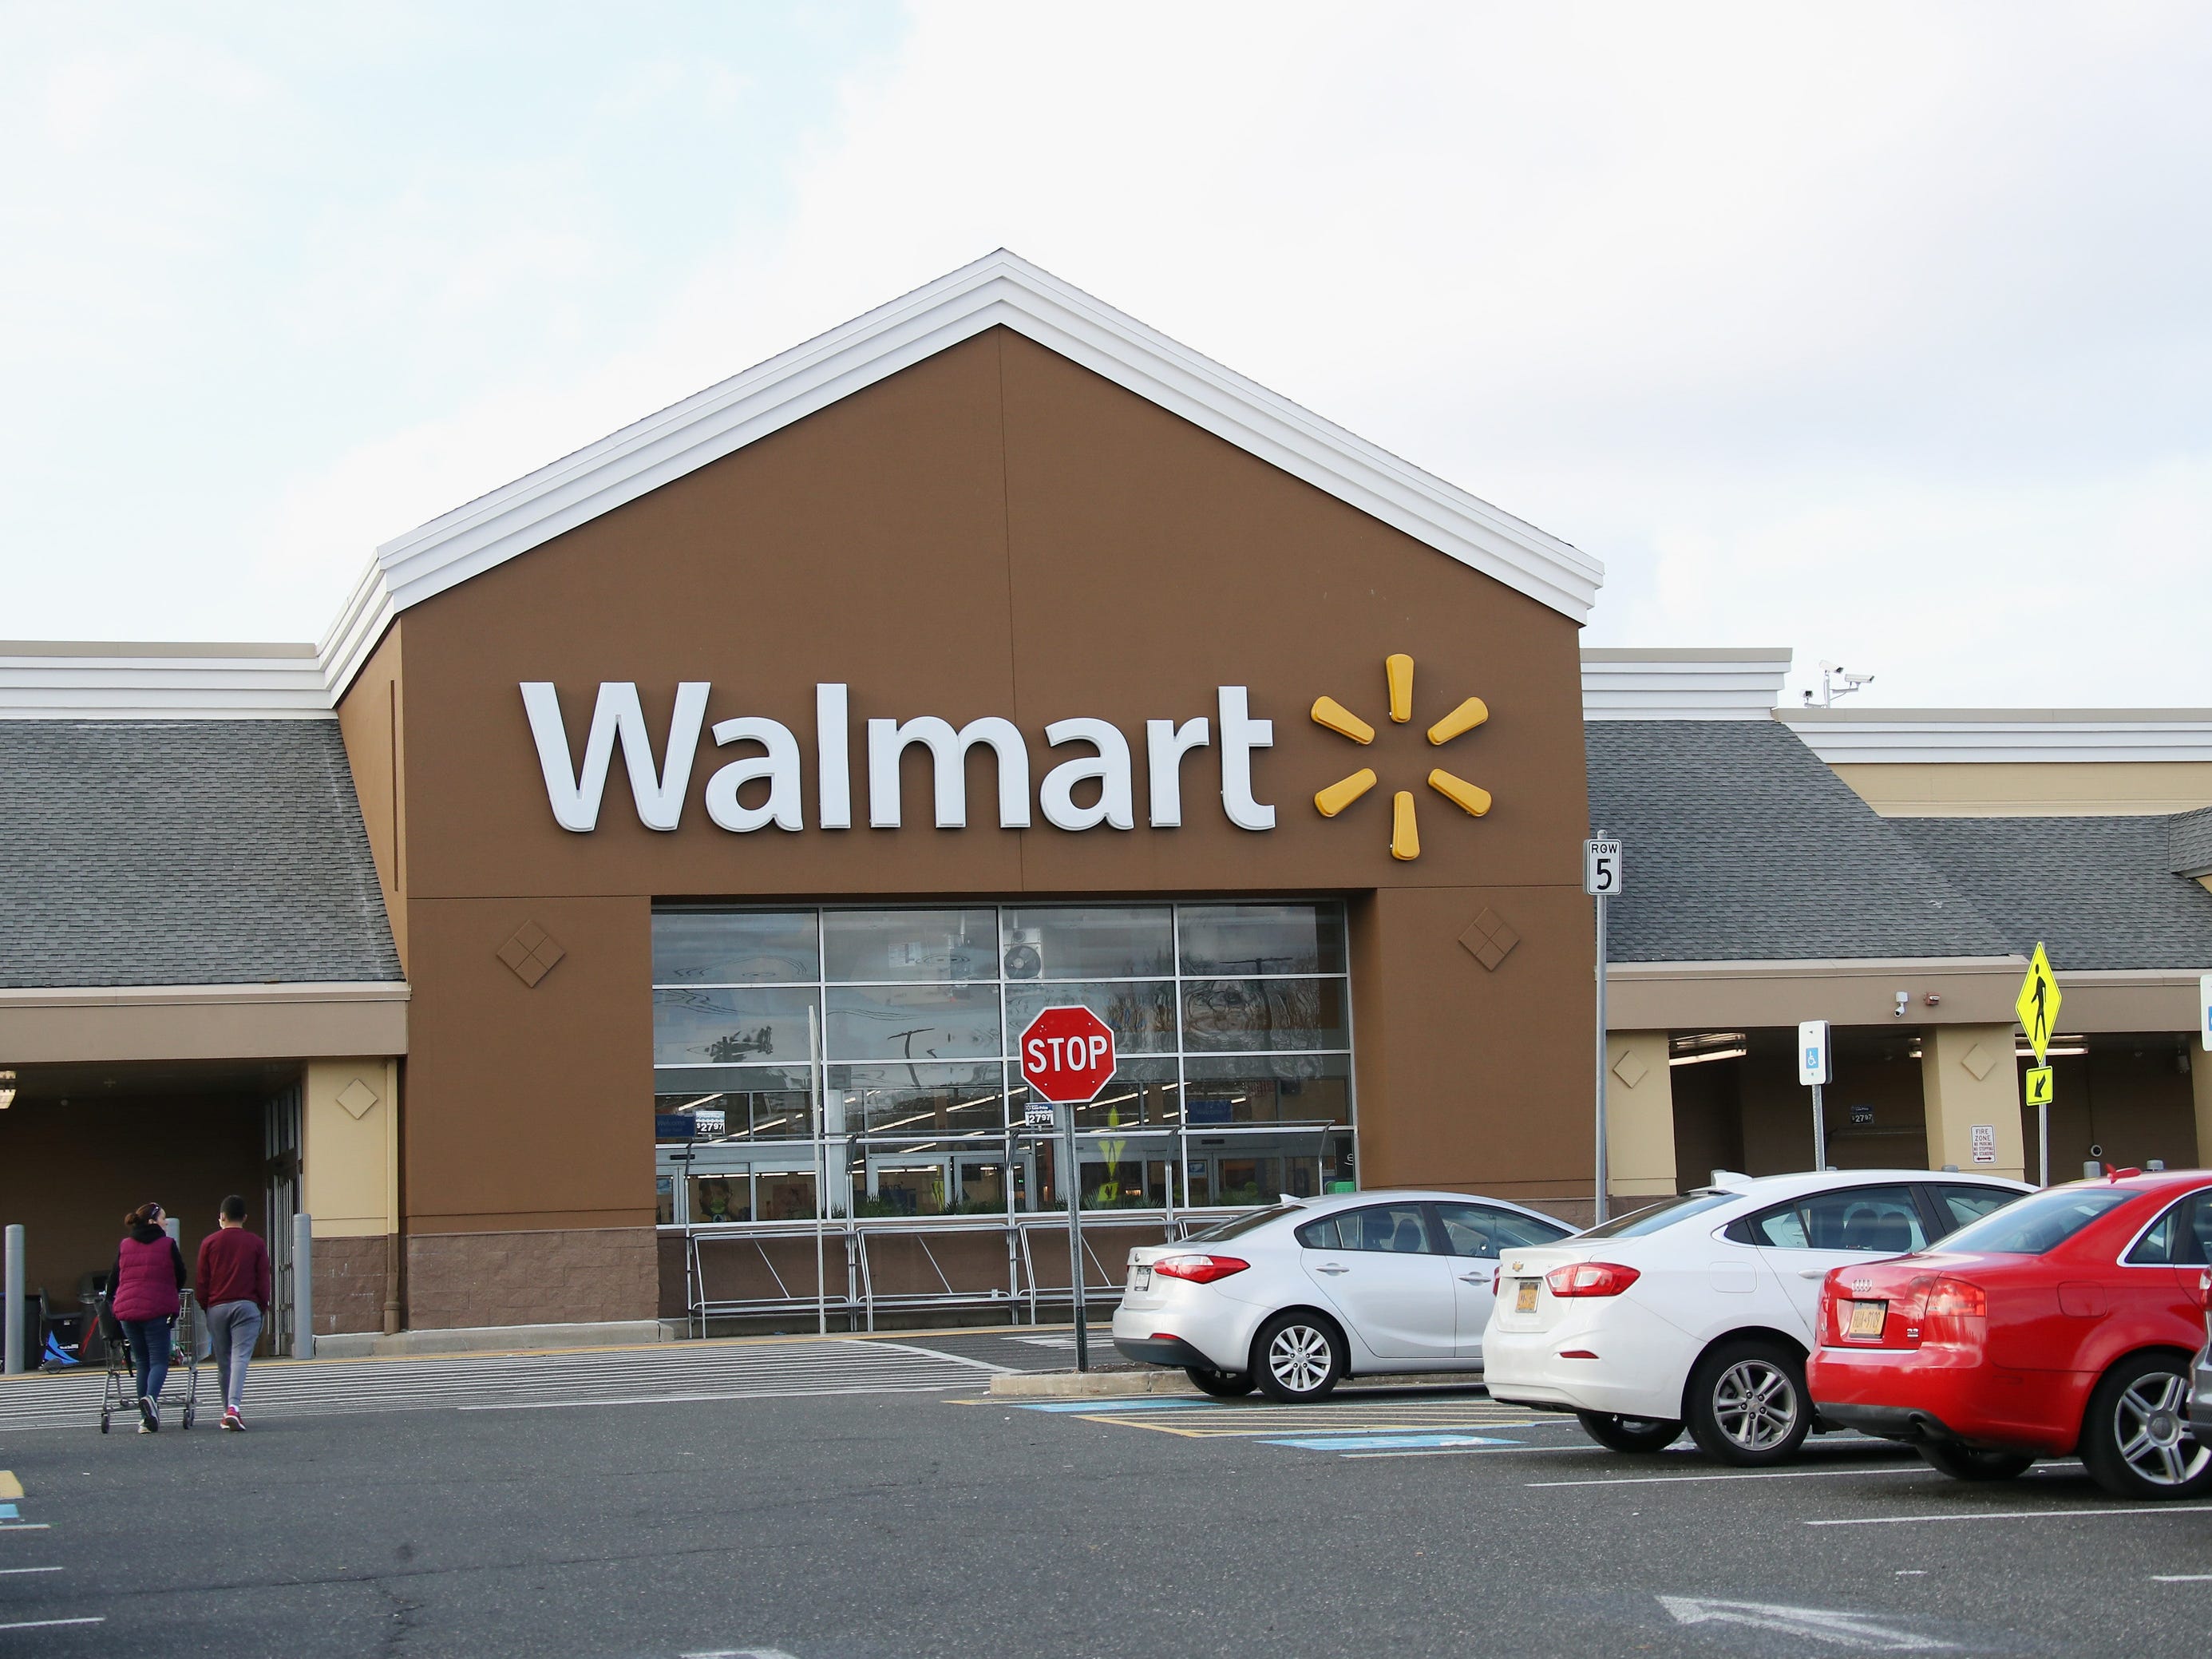 <p>Walmart asked about 200 workers at five fulfillment centers to find employment elsewhere in the company in the next 90 days or else be laid off, <a href="https://www.reuters.com/business/retail-consumer/walmart-laying-off-hundreds-us-workers-five-e-commerce-fulfillment-centers-2023-03-23/" rel="noopener">Reuters reported</a> on March 23.</p><p>The cuts are a response to the reduction of evening and weekend shifts at select Walmart facilities, including those in Chino, California; Davenport, Florida; Bethlehem, Pennsylvania; Pedricktown, New Jersey; and Fort Worth, Texas, per Reuters. </p><p>"We recently adjusted staffing levels to better prepare for the future needs of customers," a Walmart spokesperson told Reuters in a statement.</p>